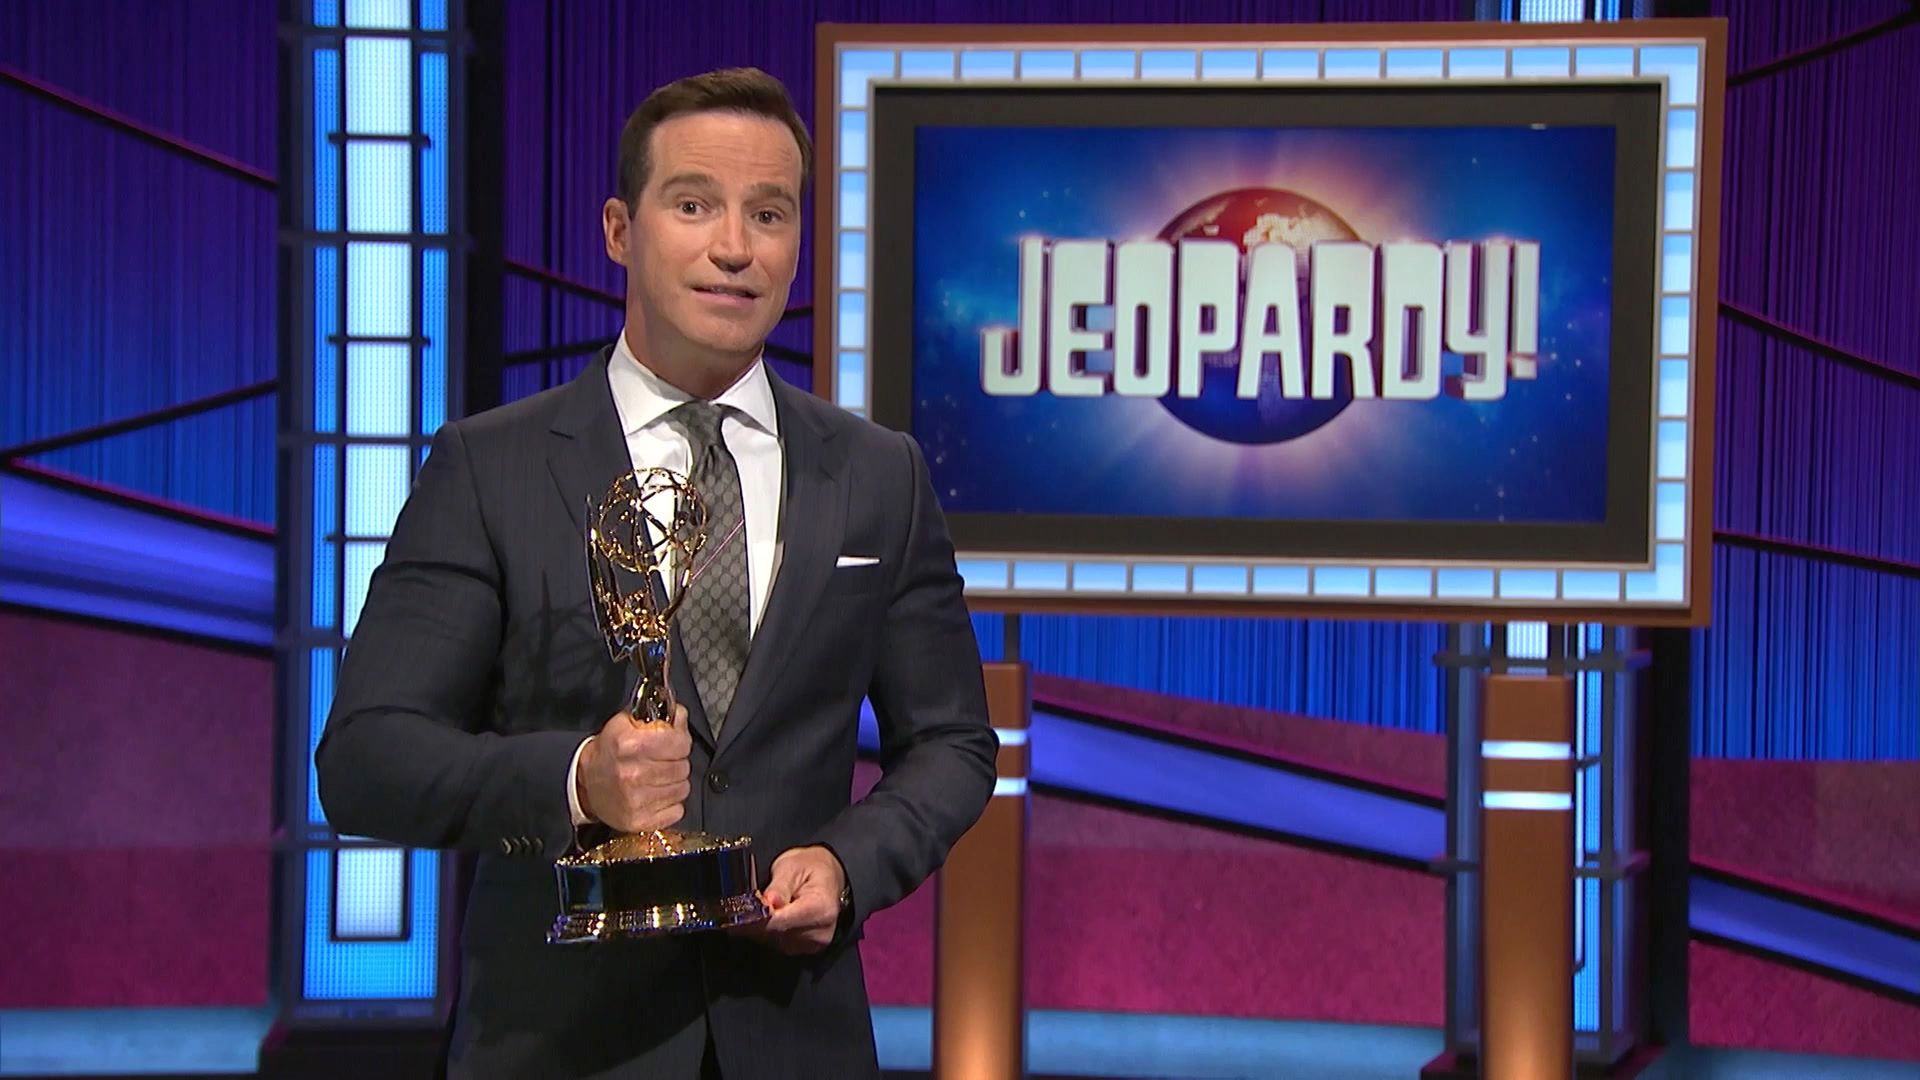 In this screenshot released on June 25, Mike Richards accepts the award for Outstanding Game Show for Jeopardy! during the 48th Annual Daytime Emmy Awards broadcast on June 25, 2021.